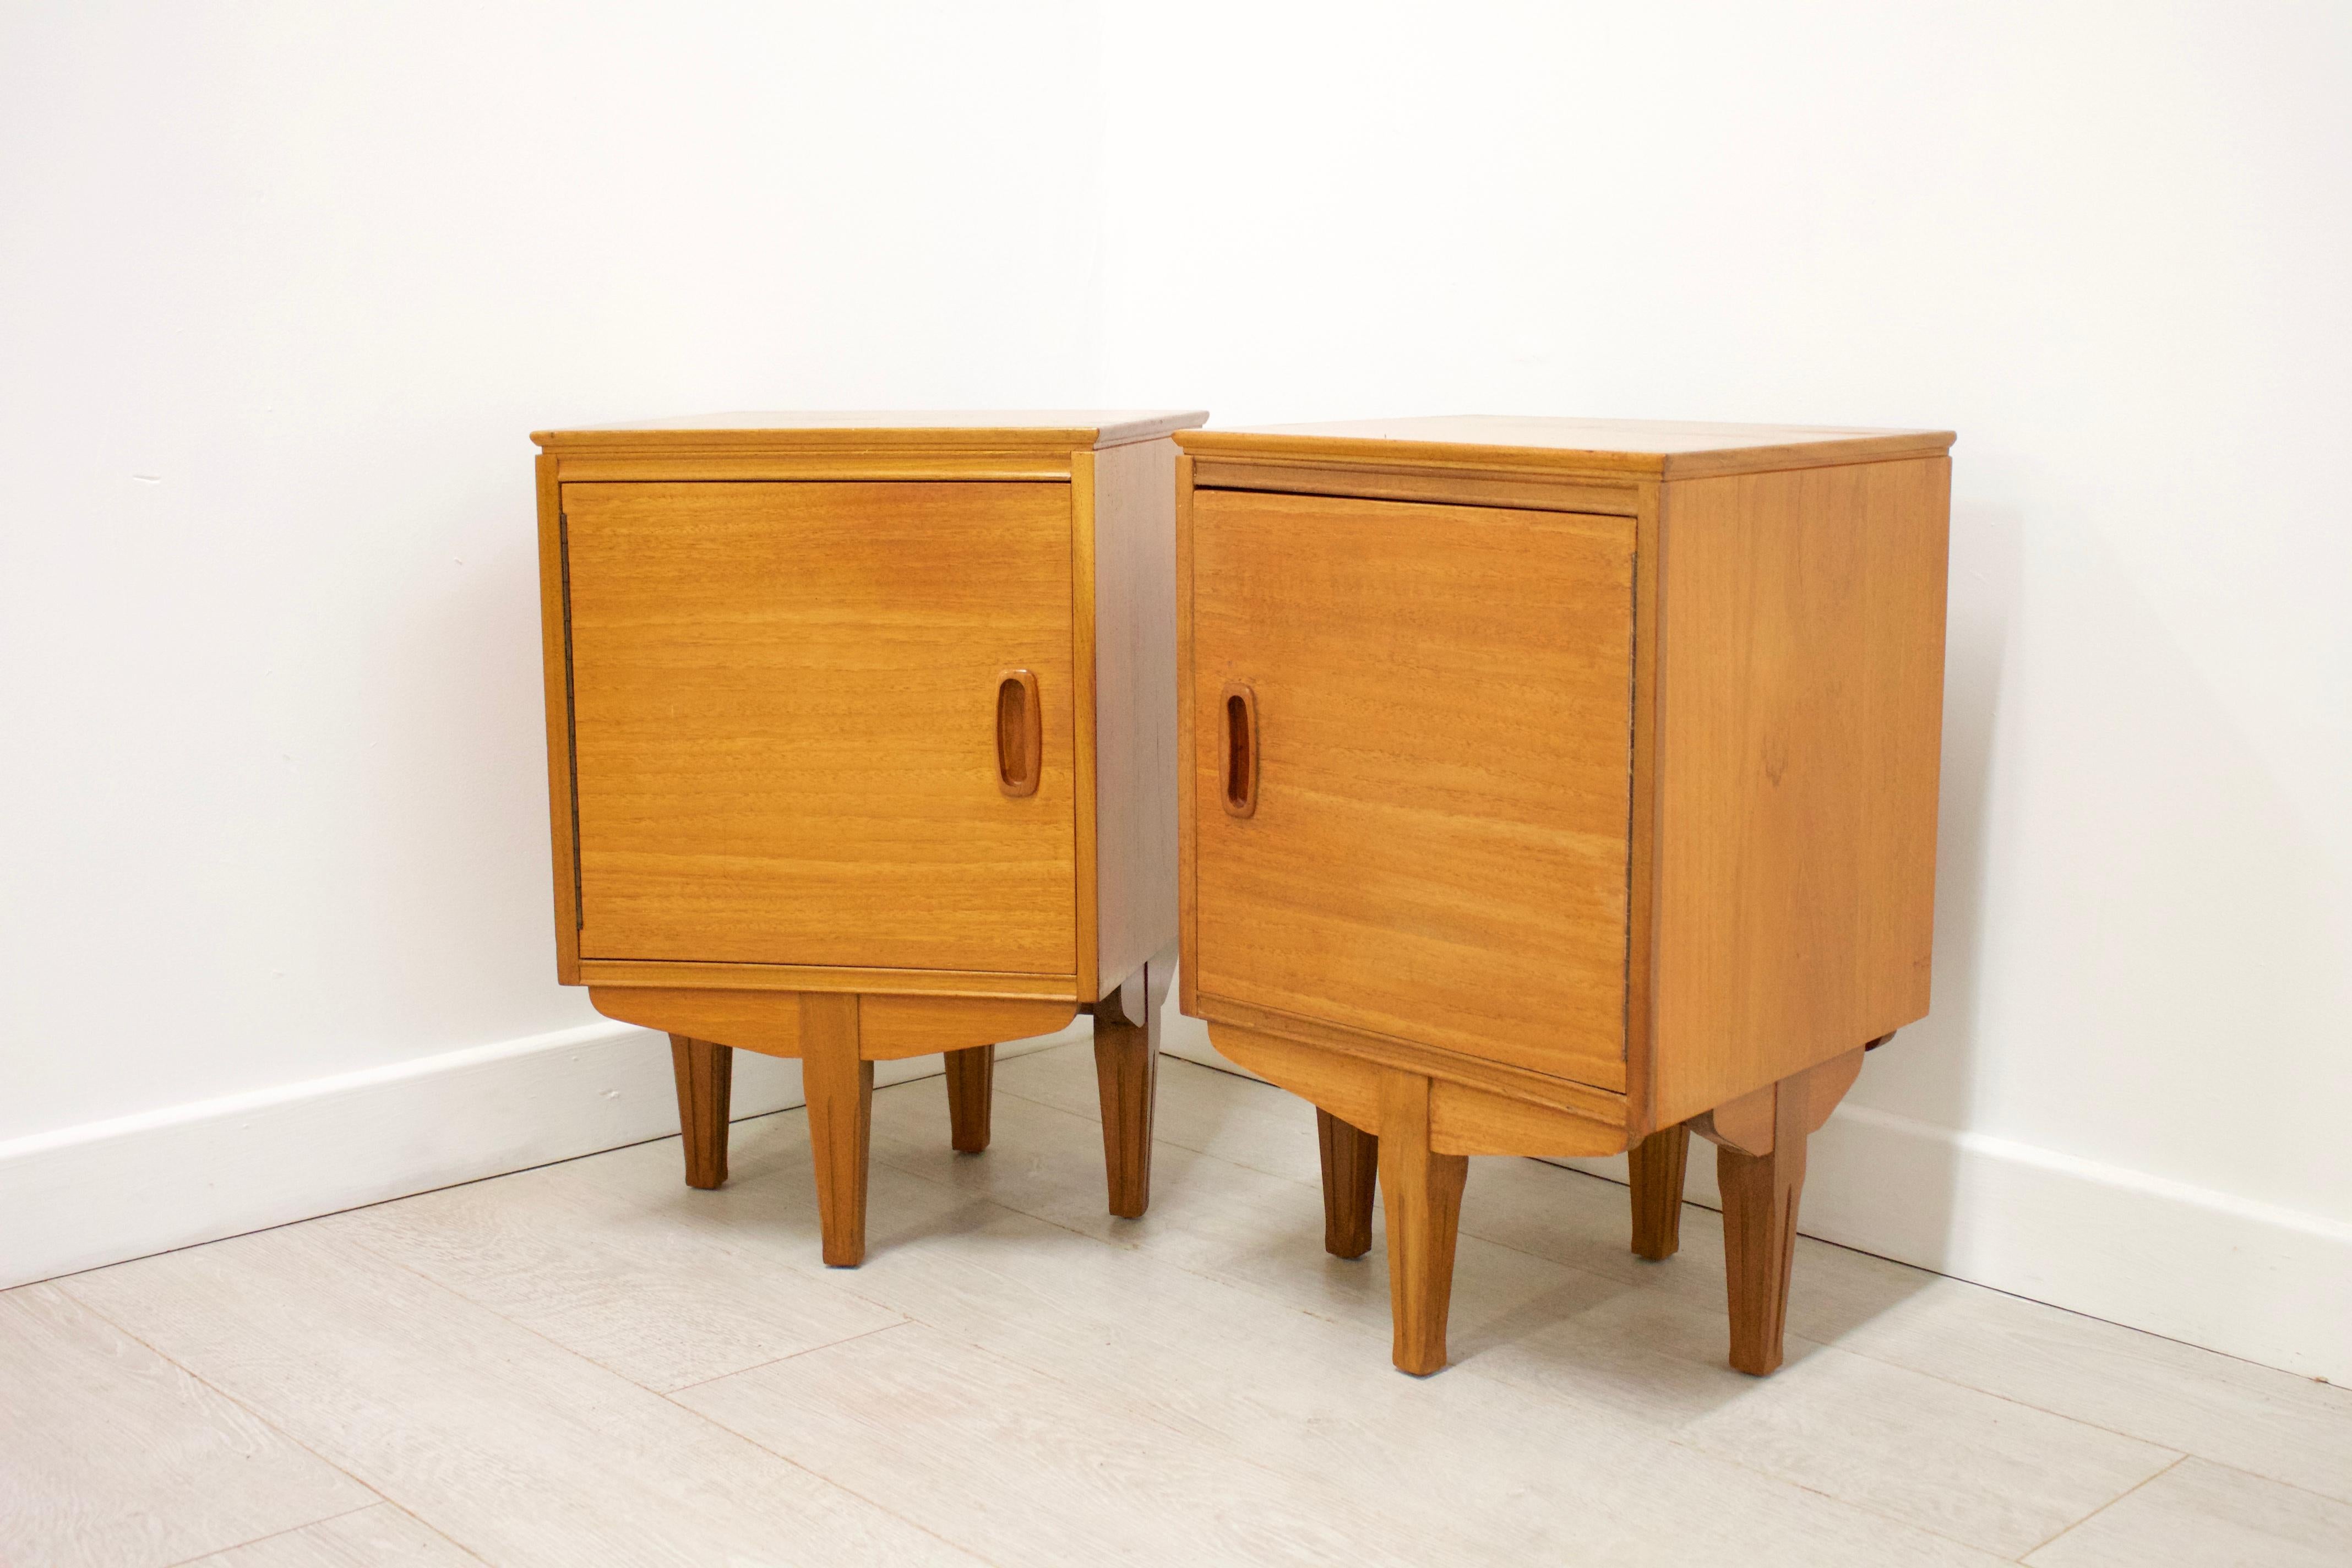 - This is a pair of very stylish midcentury bedside cabinet / tables.
- Features a drawer inside both for ample storage.